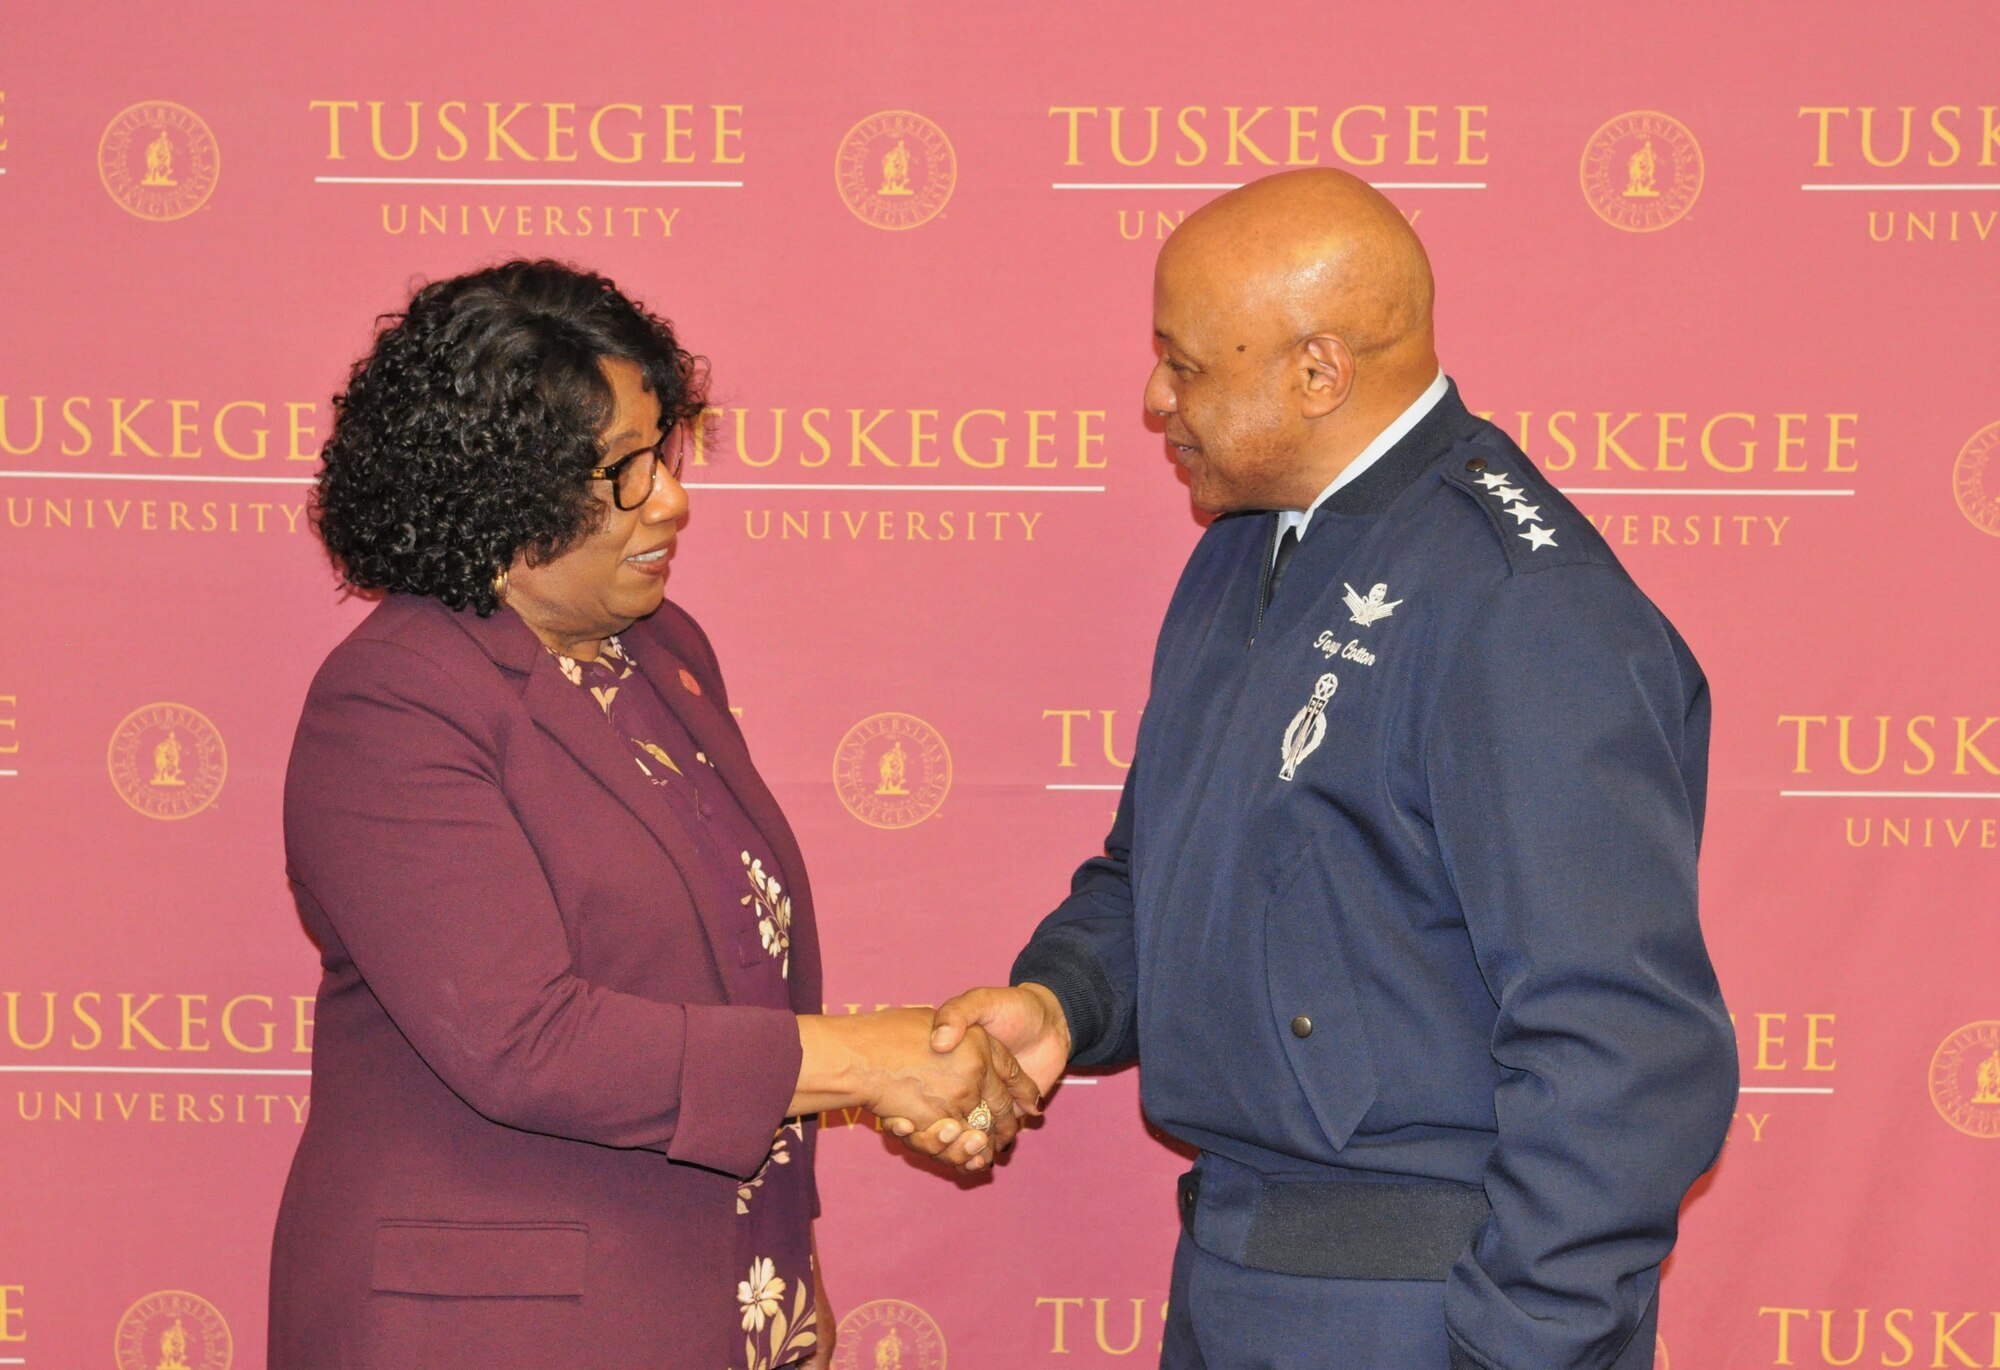 Dr. Charlotte Morris, president, Tuskegee University, right, shakes the hand of Gen. Anthony Cotton, commander, Air Force Global Strike Command, left, after they discussed the establishment of Project Tuskegee. Project Tuskegee is a partnership between AFGSC and the university where Air Force Reserve Officer Training Corps cadets are exposed to the opportunities available as an AFGSC “Striker.” (Air Force Courtesy Photo)